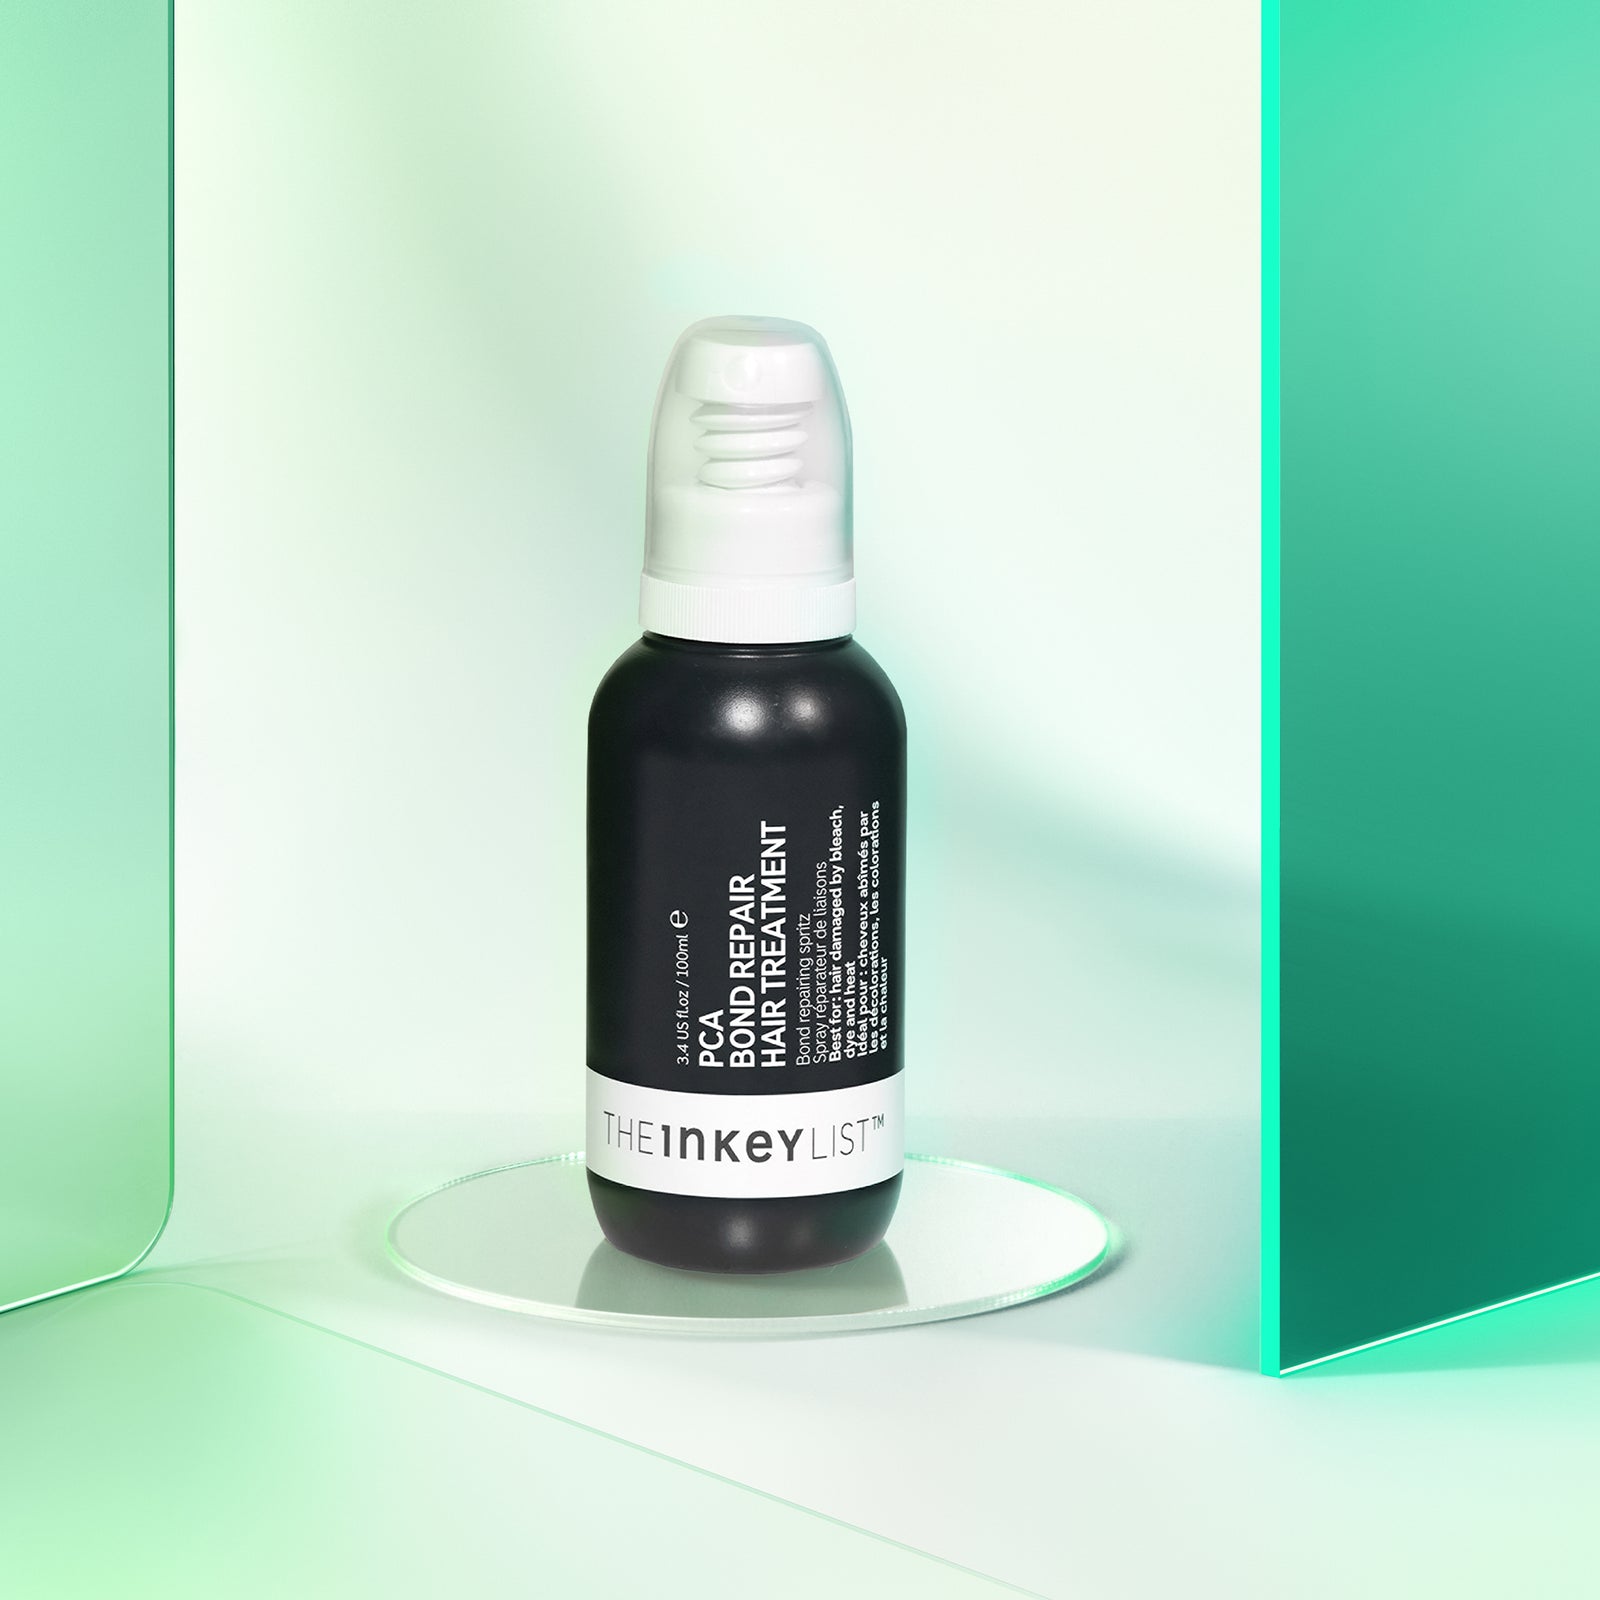 PCA Bond Repair Hair Treatment product against a glossy green background